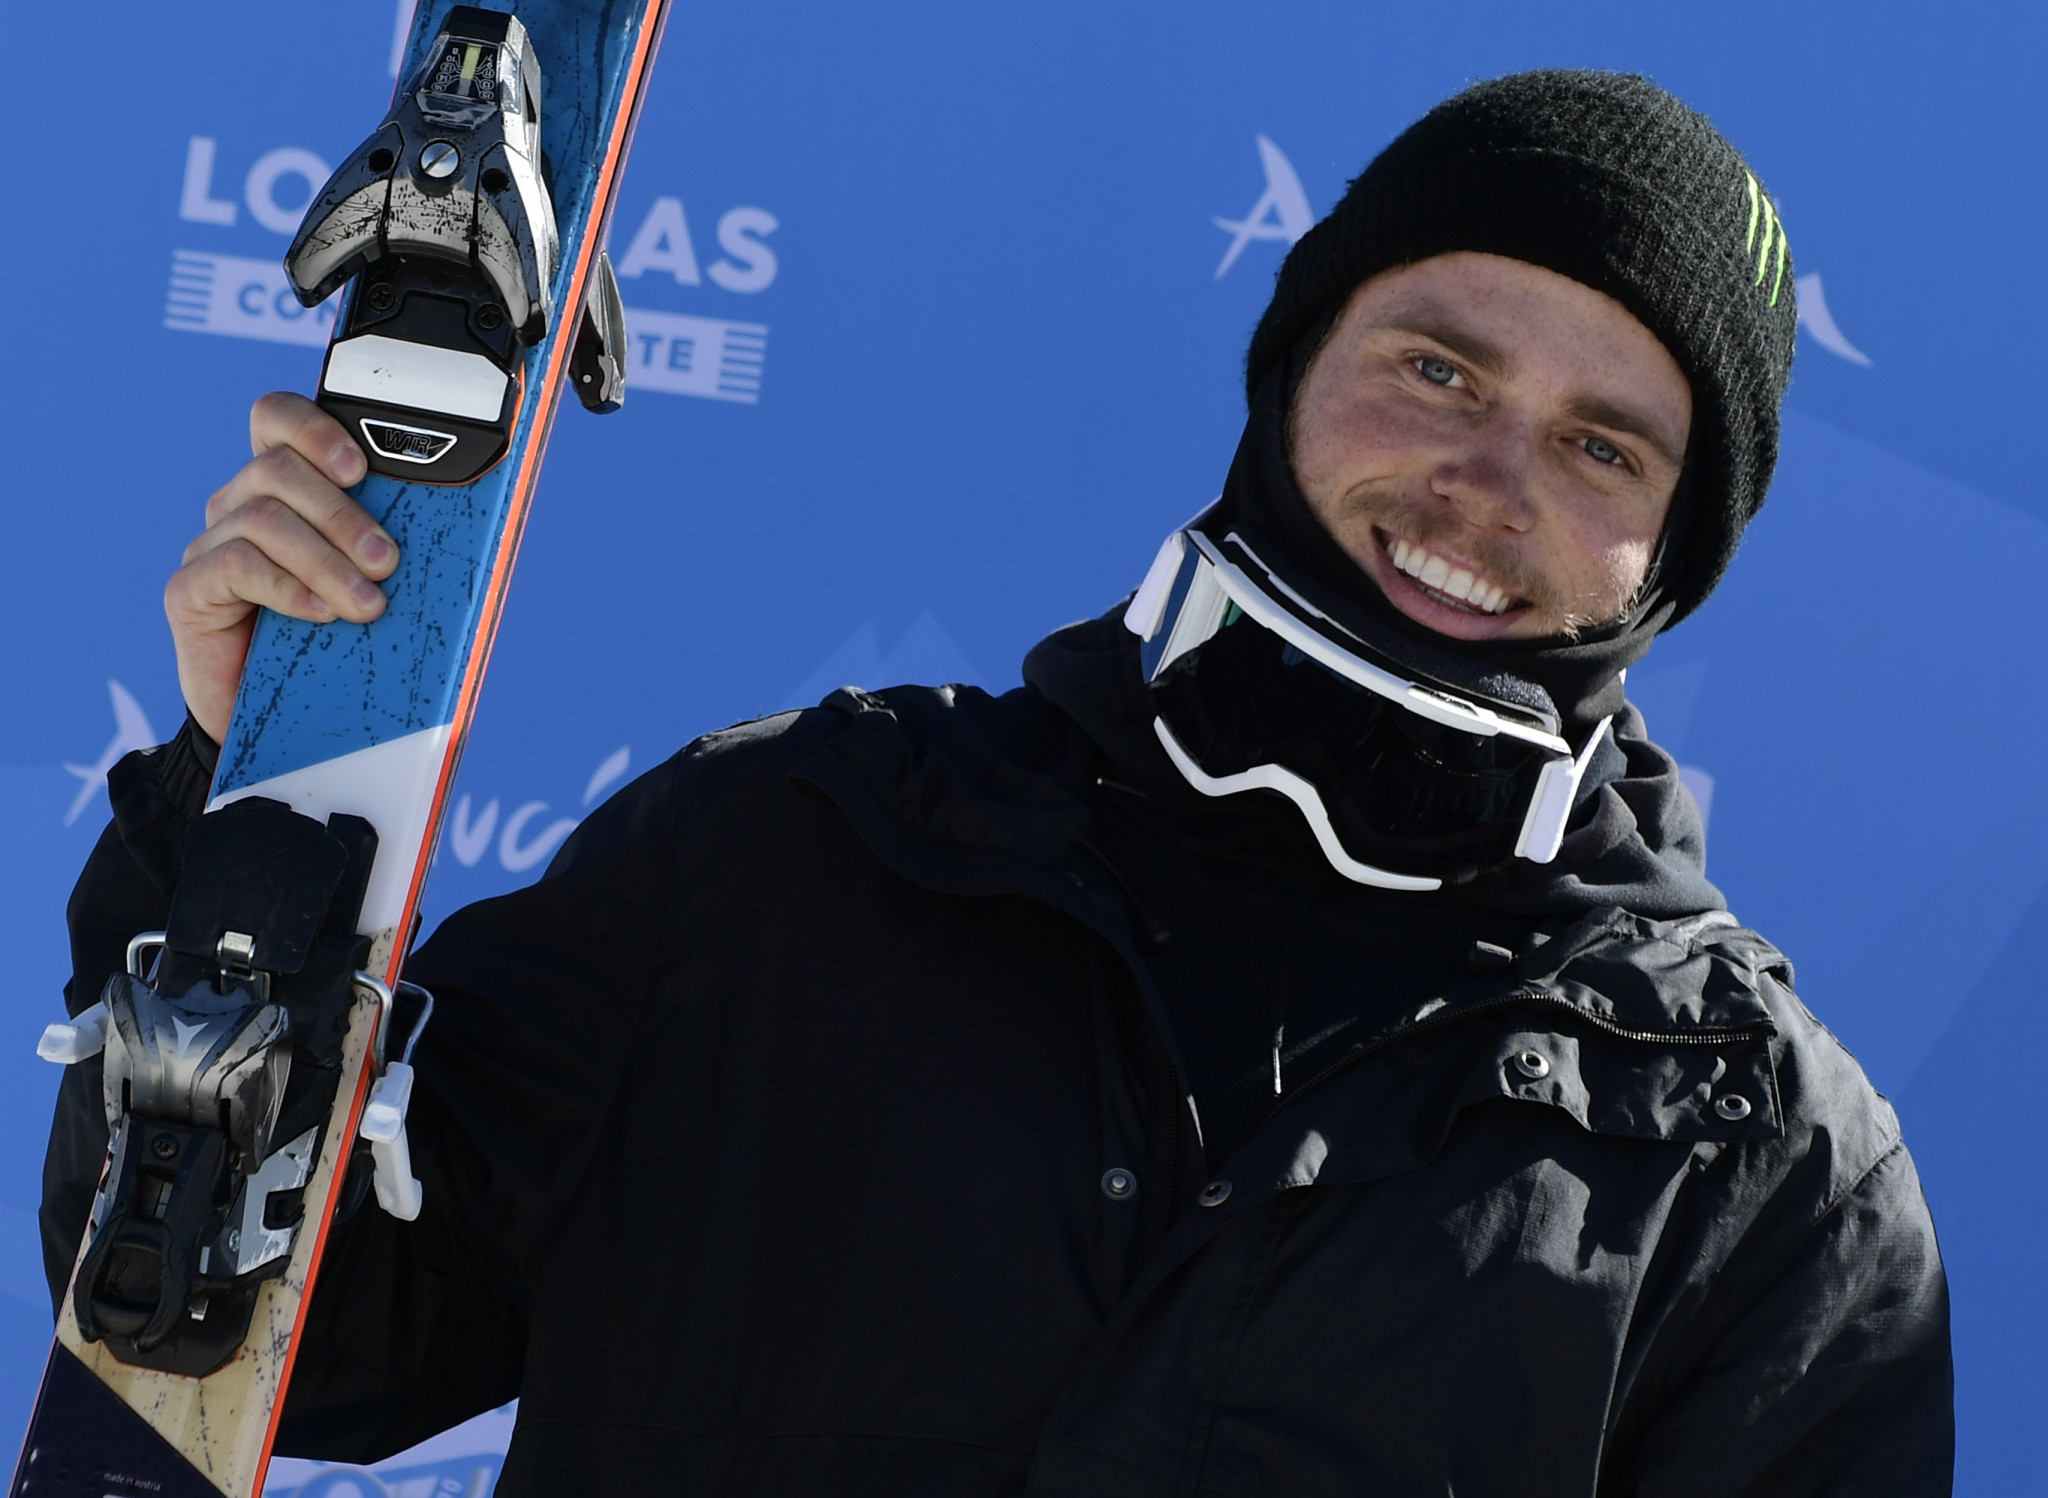 Sochi 2014 silver medallist to help United States Ski and Snowboard celebrate National Coming Out Day